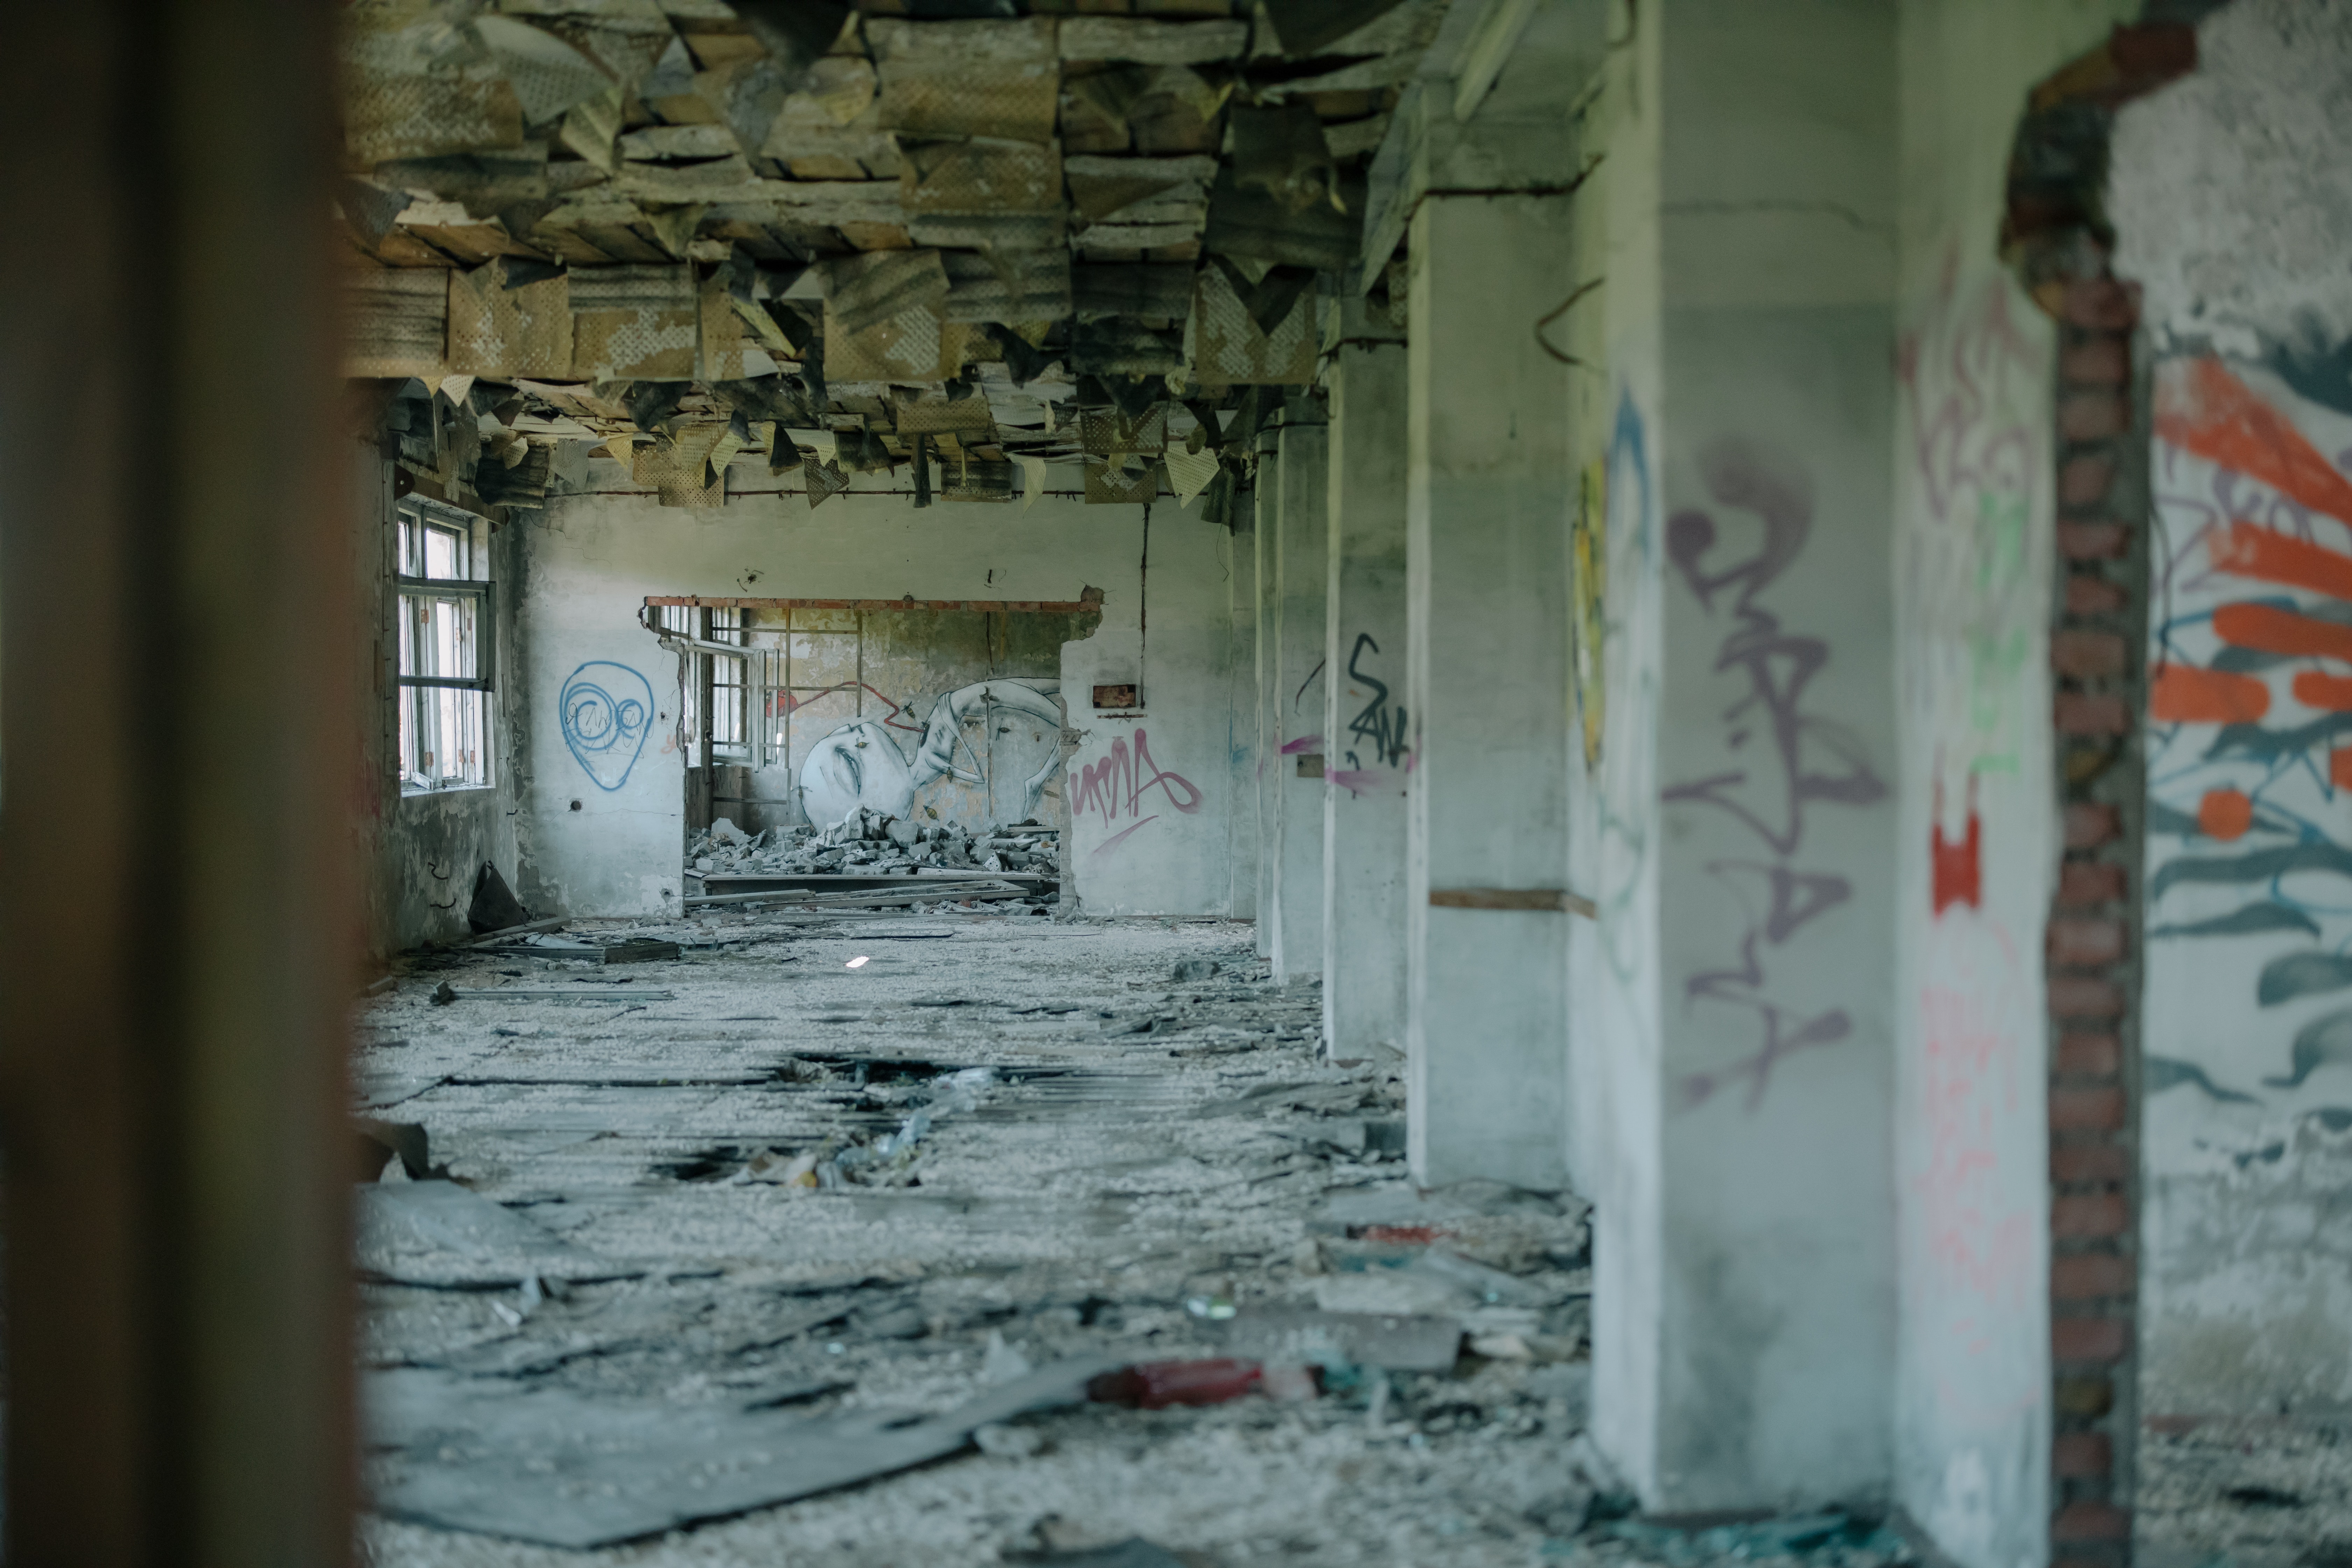 Image of the interior of an abandoned building. Lots of concrete, graffiti and collapsed roof tiles